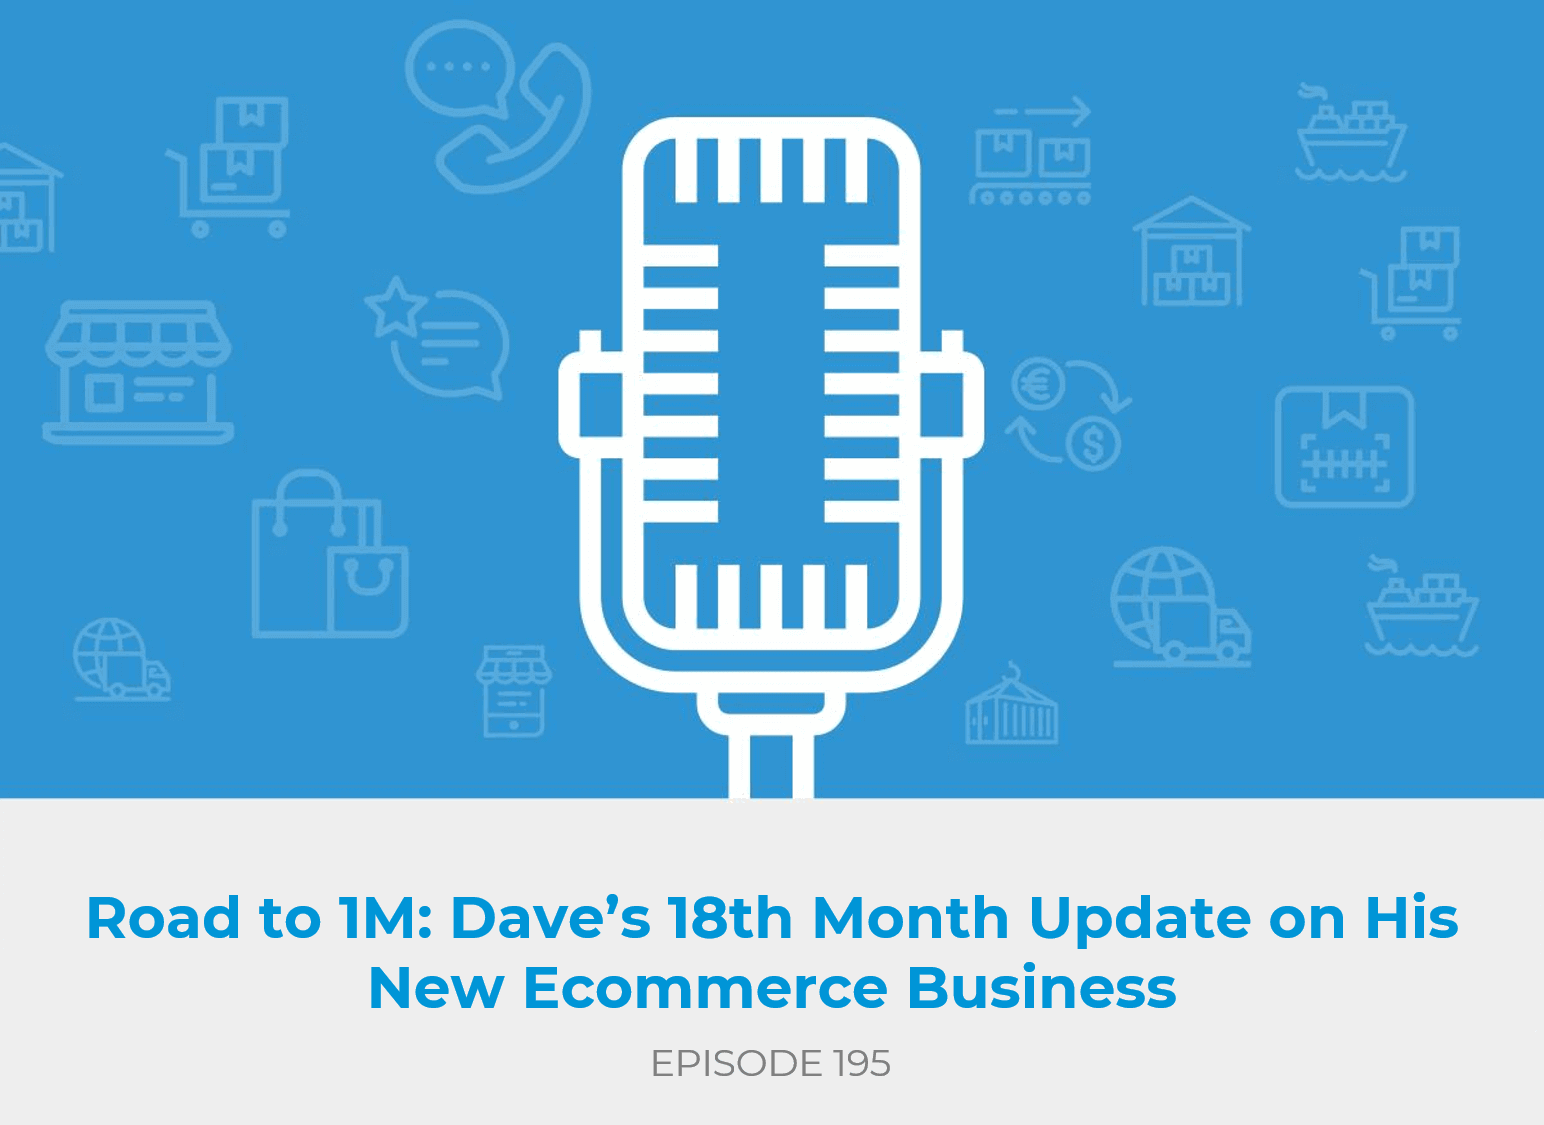 Dave’s 18th Month Update on His New Ecommerce Business